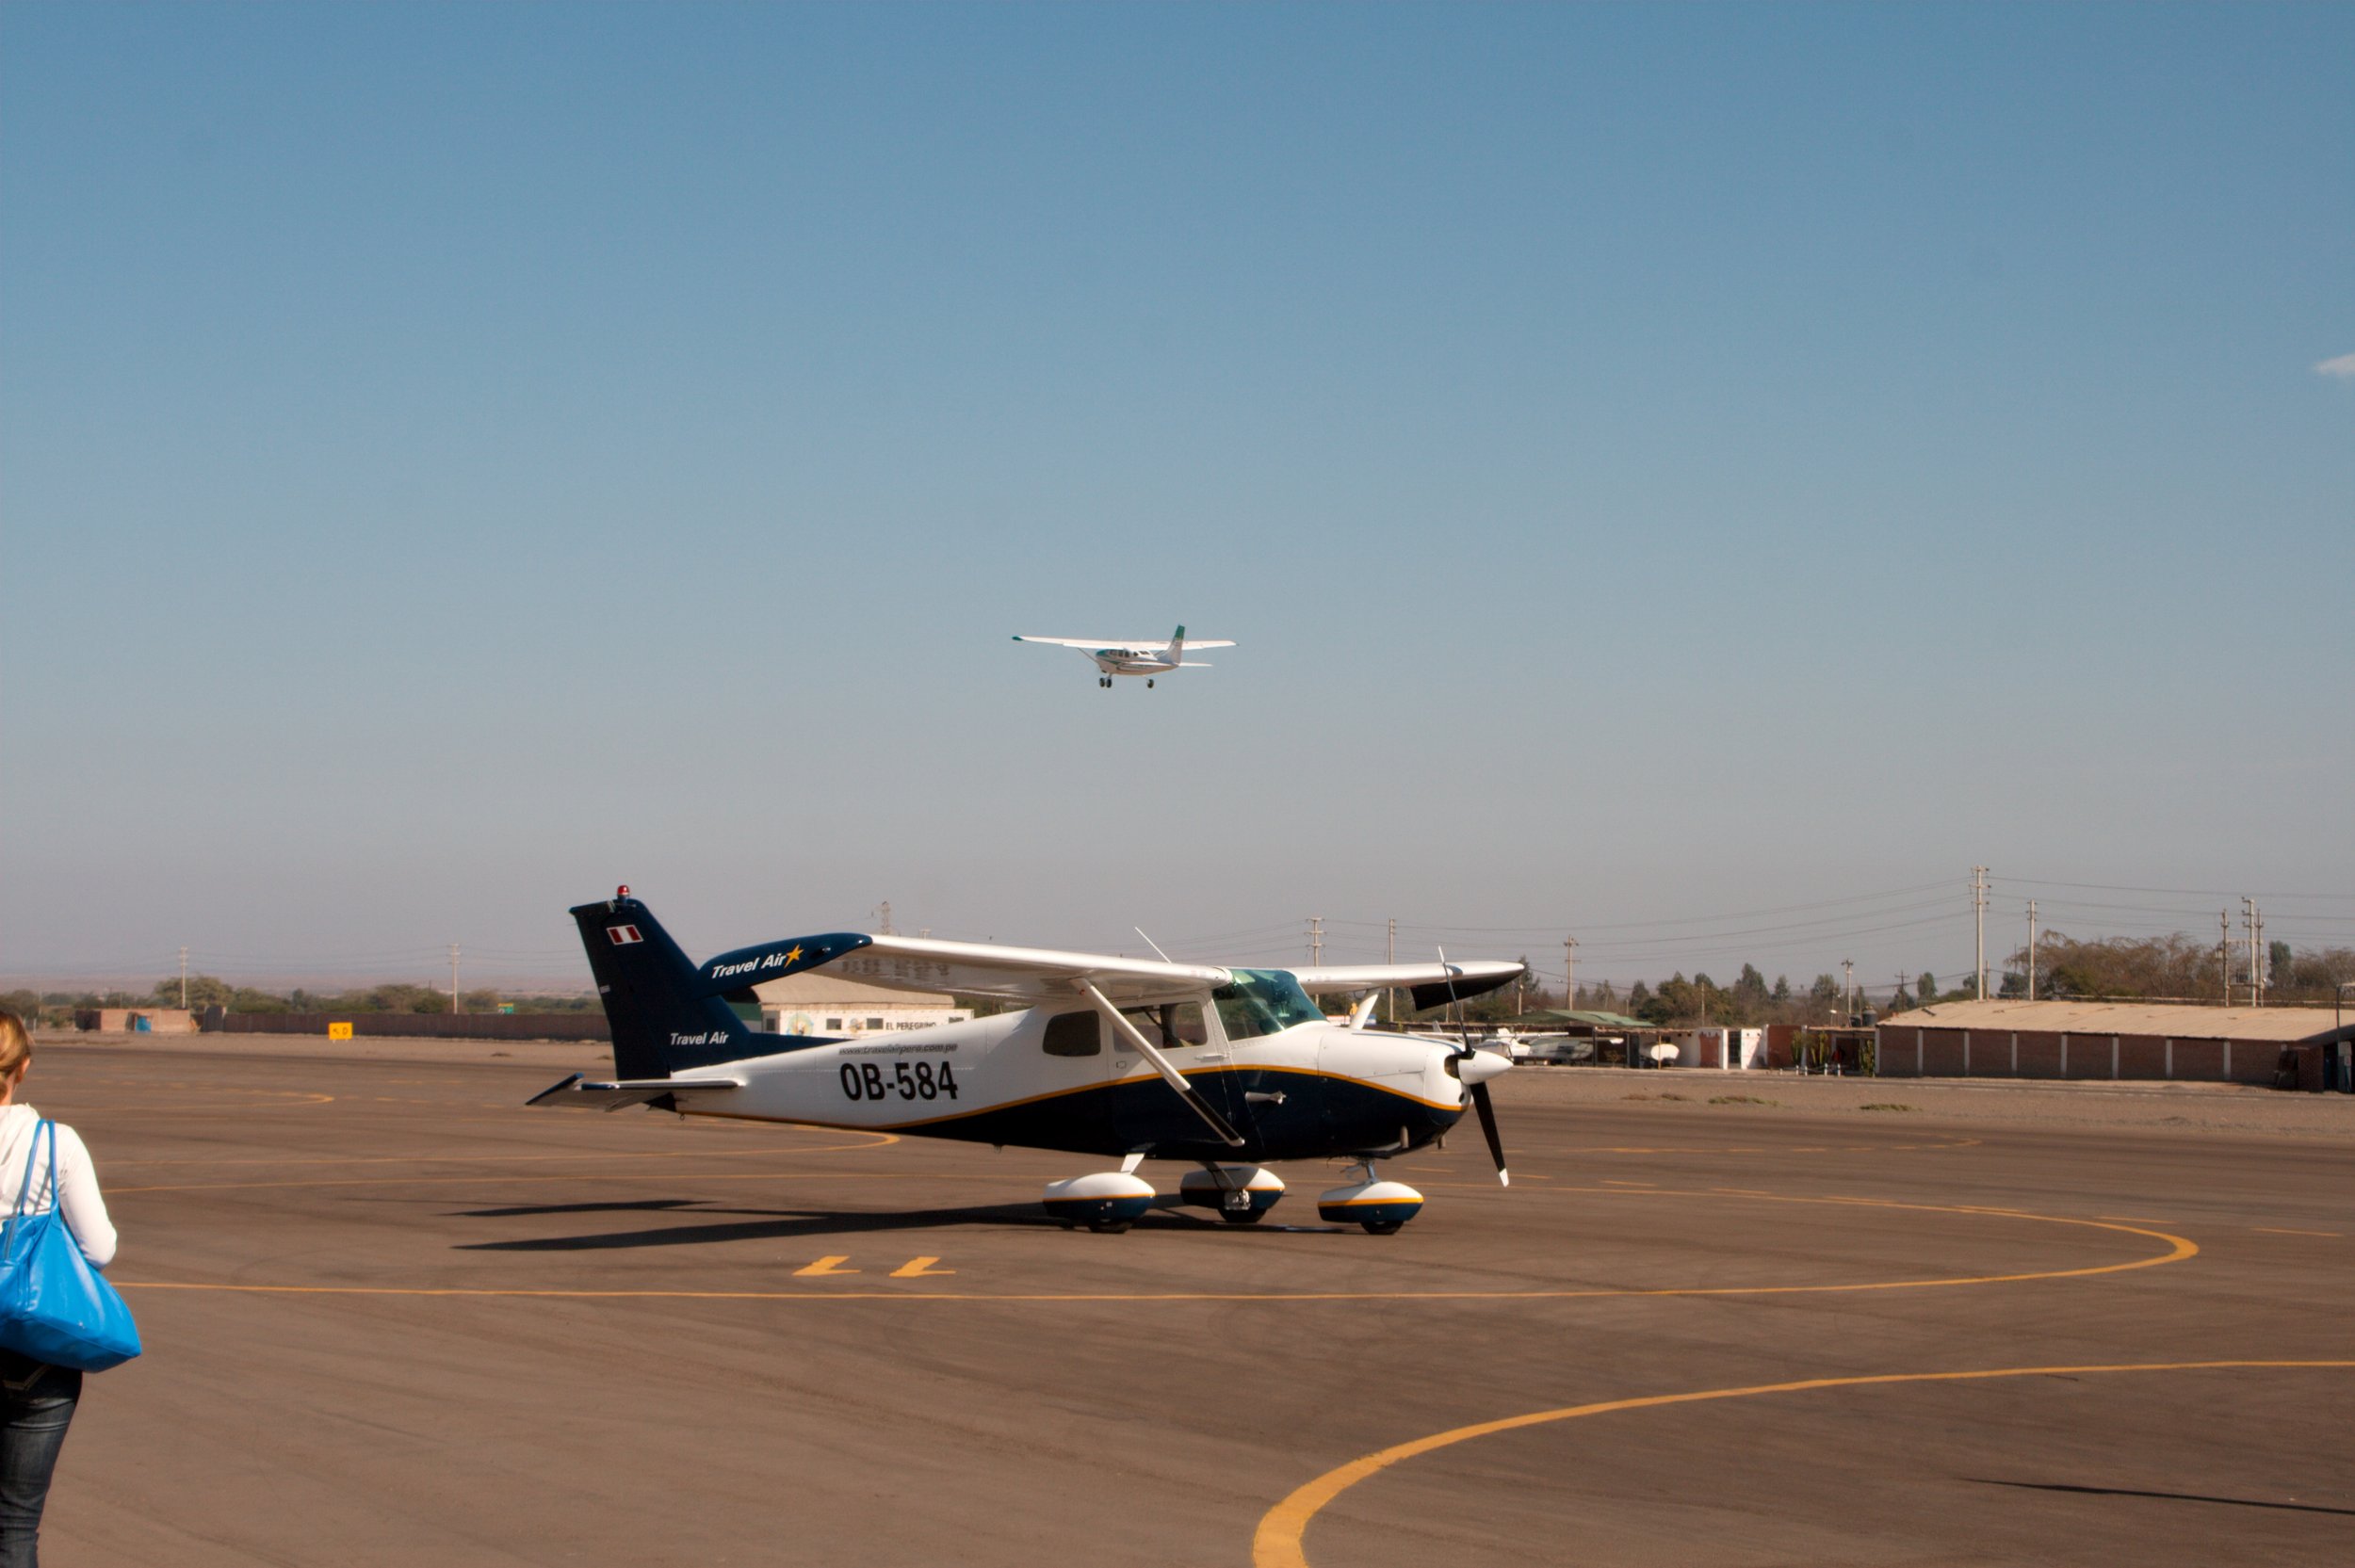  Getting ready for the flight at the Nazca airport. Photo by  Christian Haugen , used under  CC BY 2.0    on Flickr. 